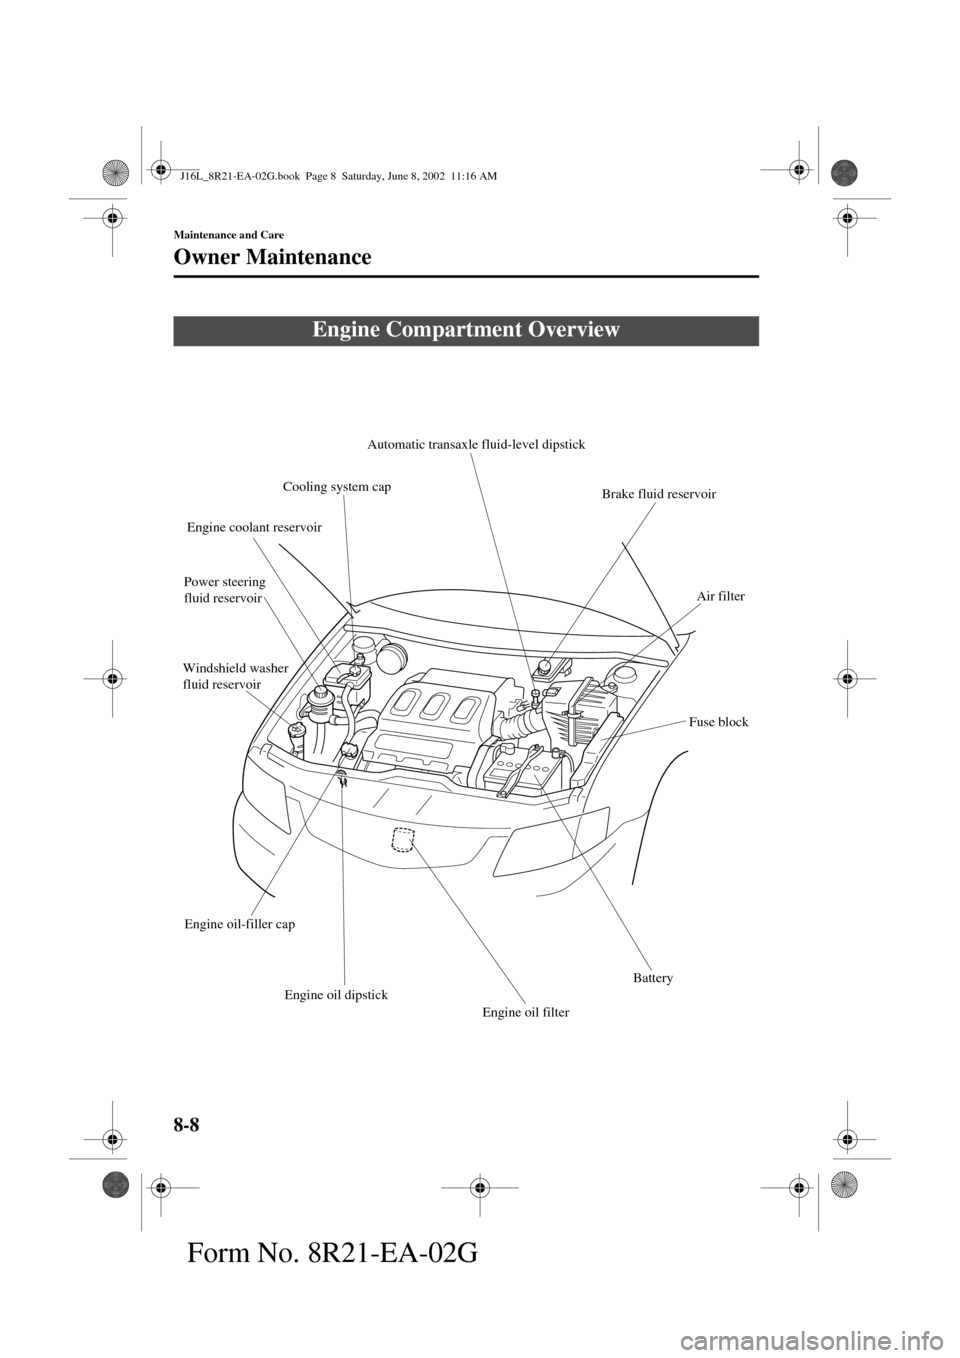 MAZDA MODEL MPV 2003  Owners Manual (in English) 8-8
Maintenance and Care
Owner Maintenance
Form No. 8R21-EA-02G
Engine Compartment Overview
Automatic transaxle fluid-level dipstick 
Cooling system cap
Engine coolant reservoir
Power steering 
fluid 